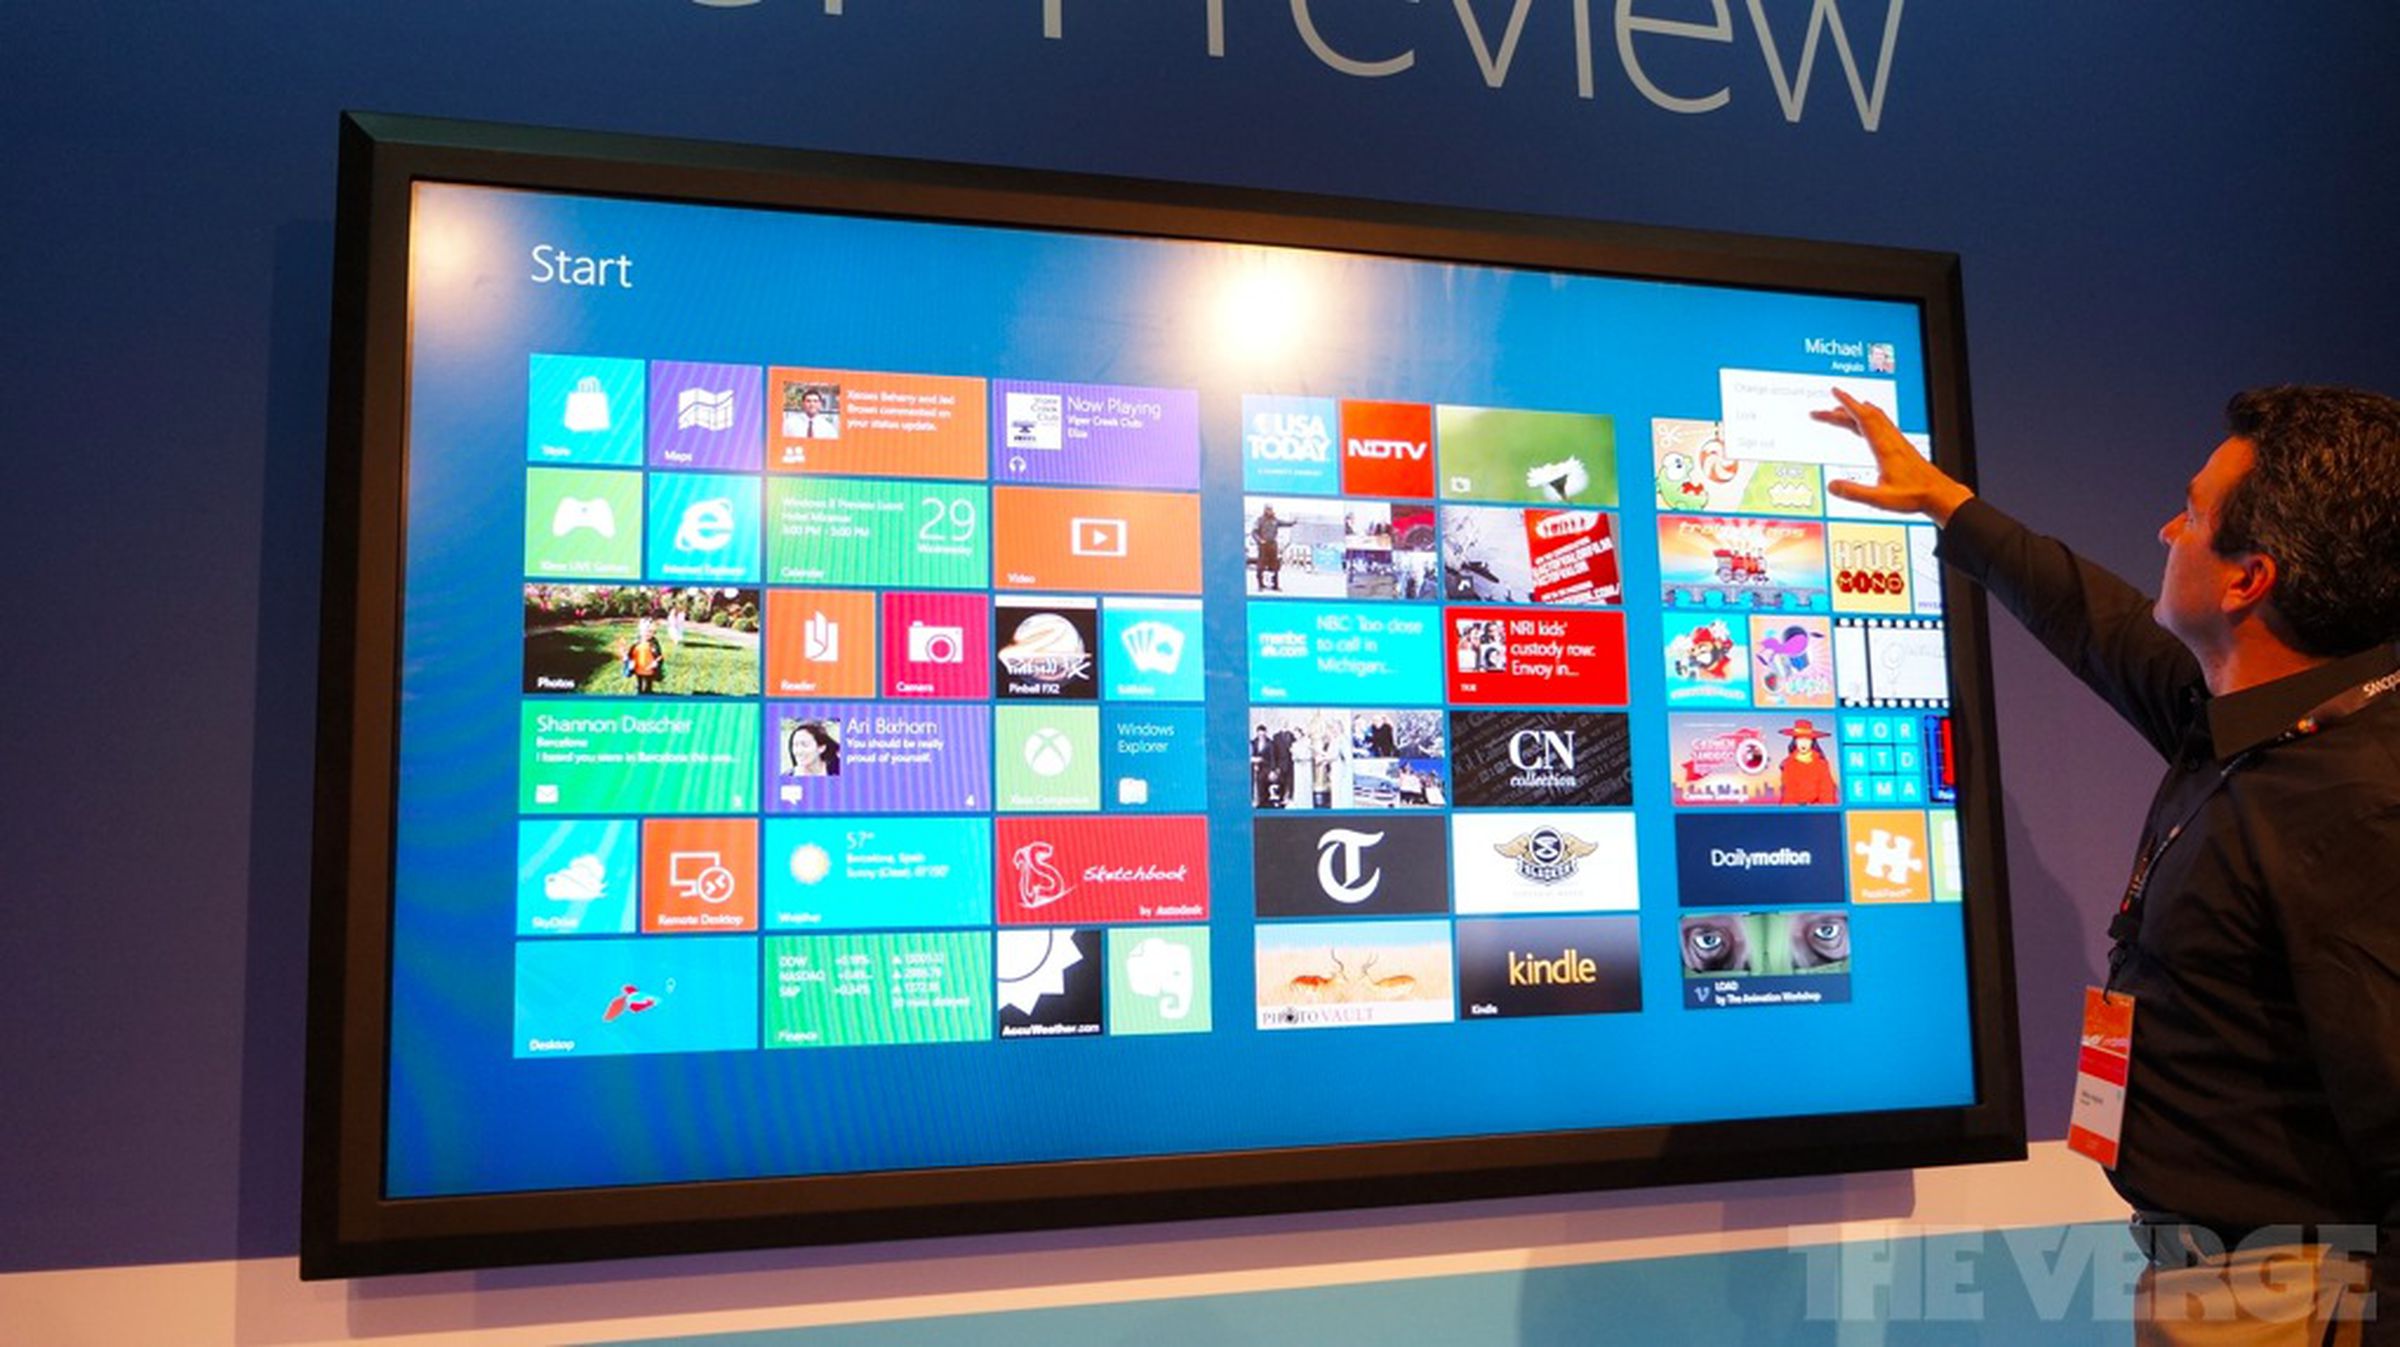 Windows 8 Consumer Preview on an 82-inch display